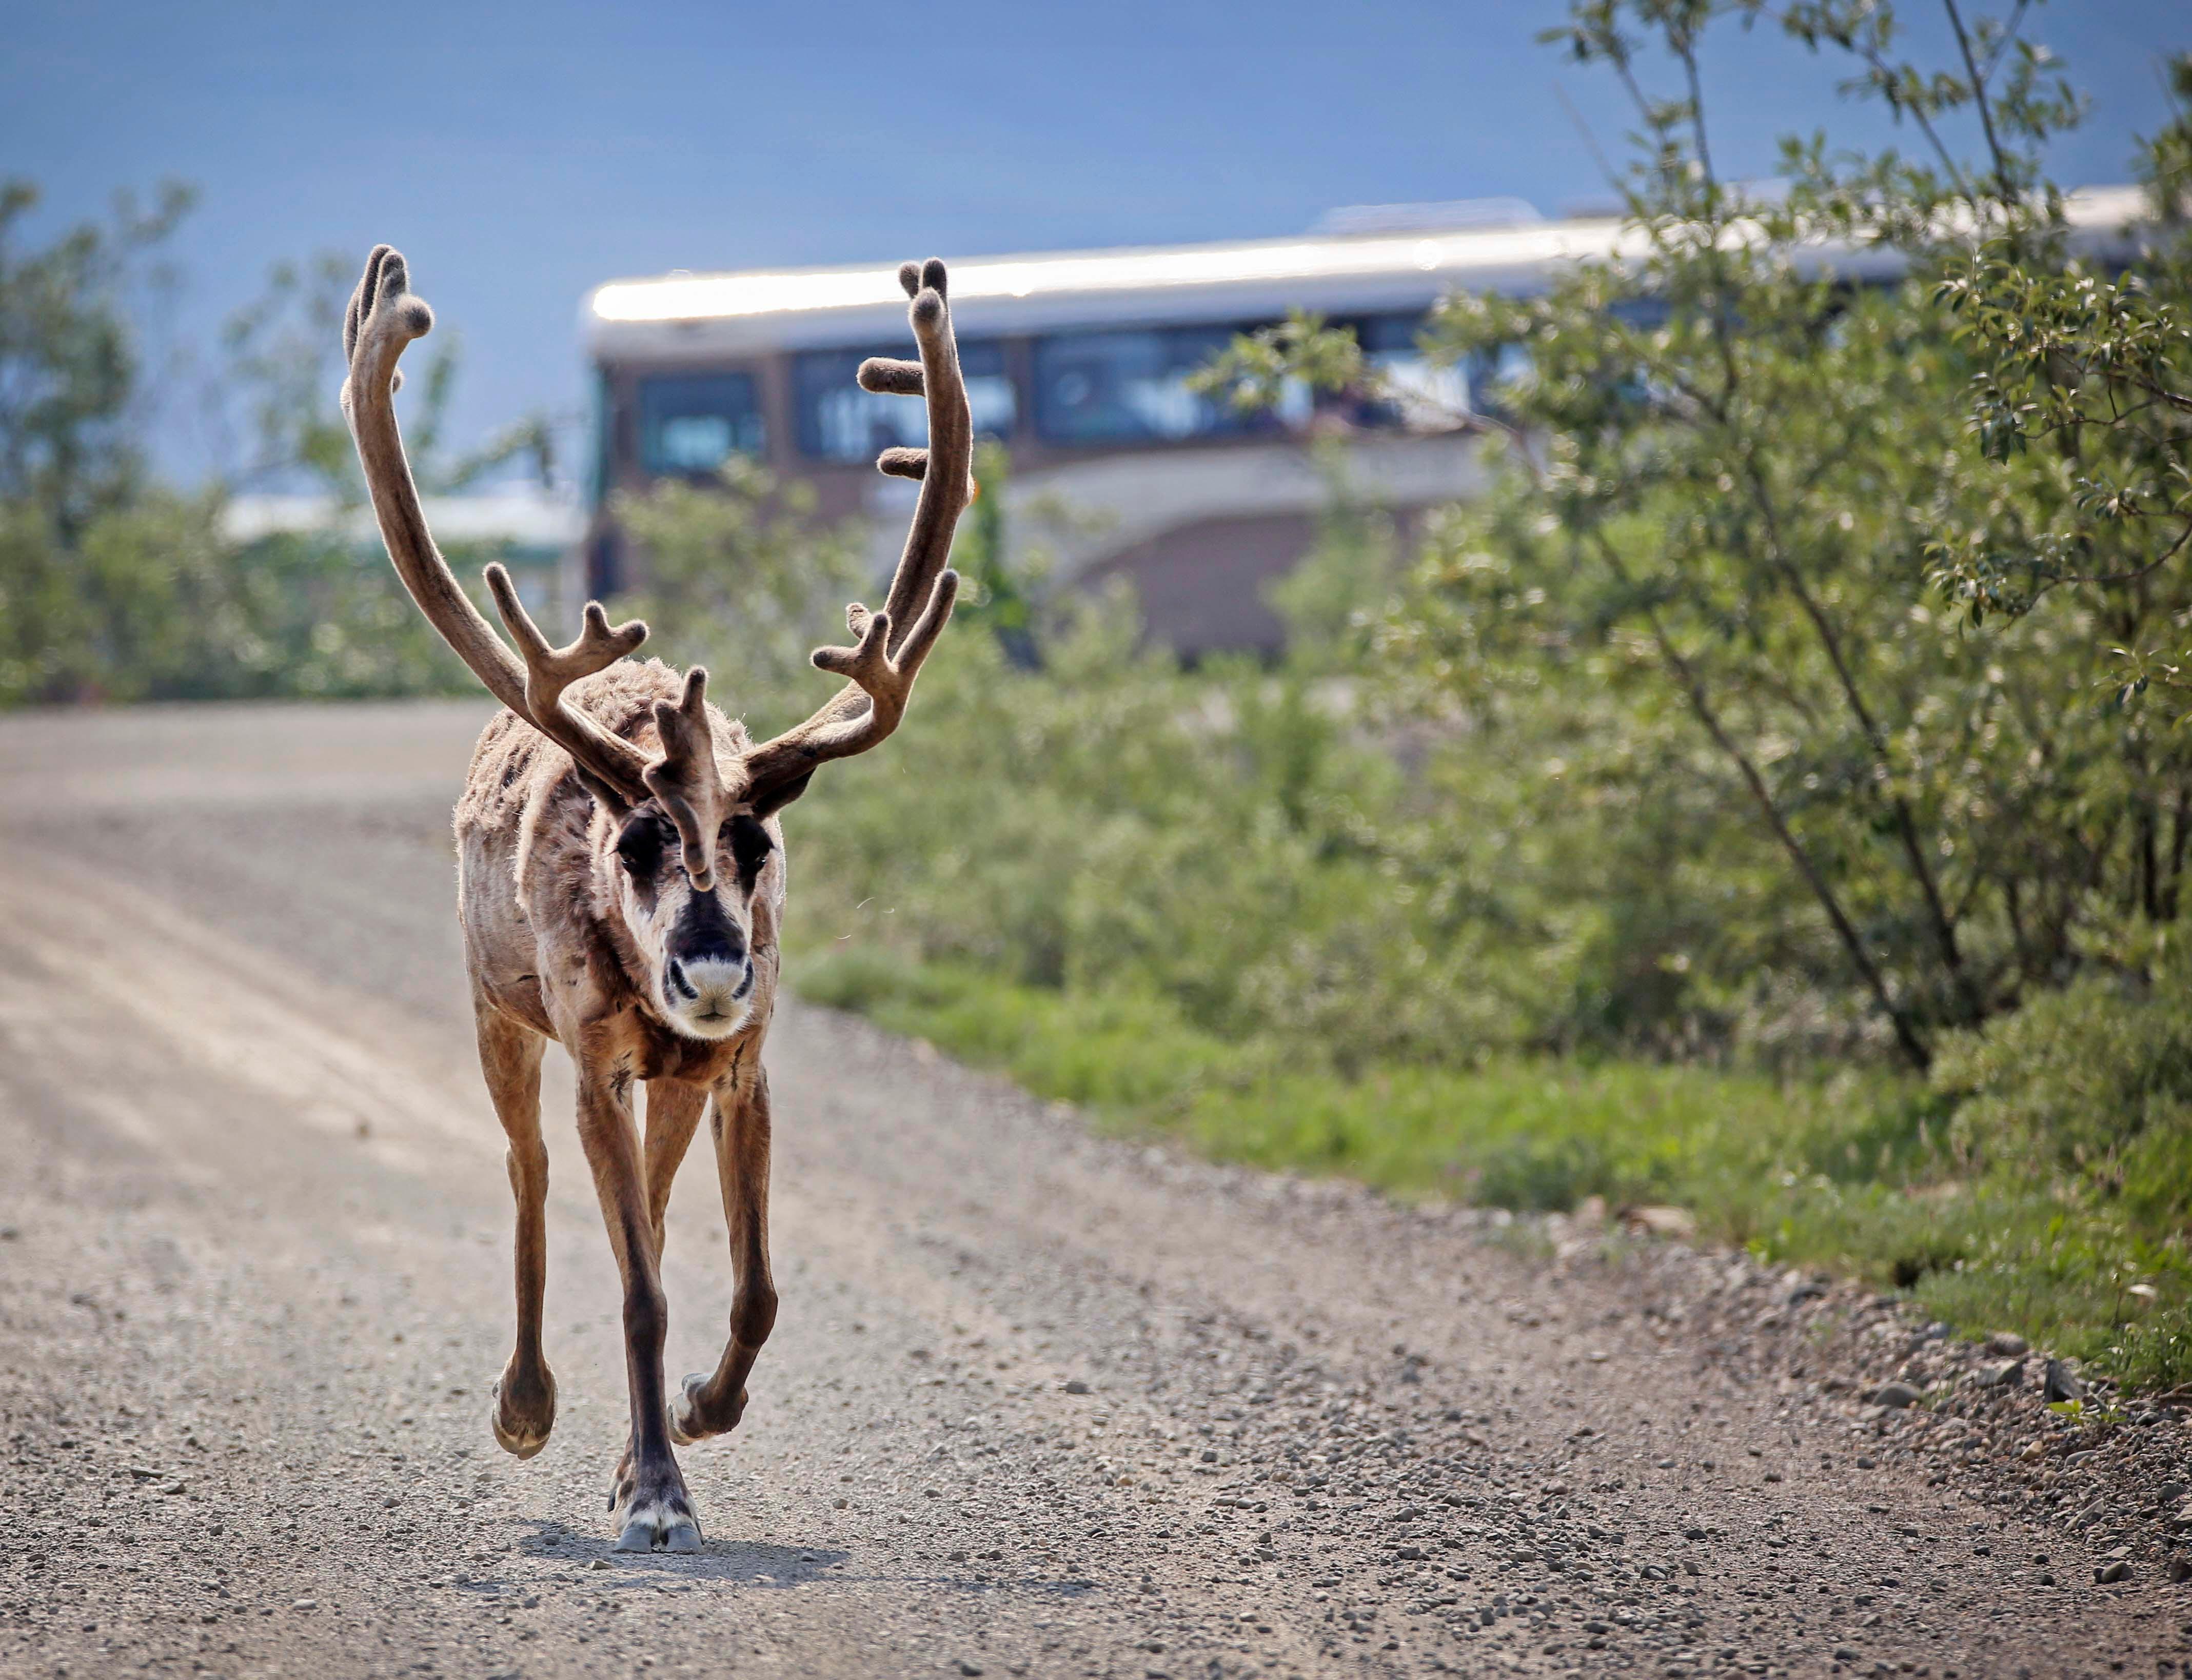 a bus on a gravel road behind a large caribou that is trotting on the road